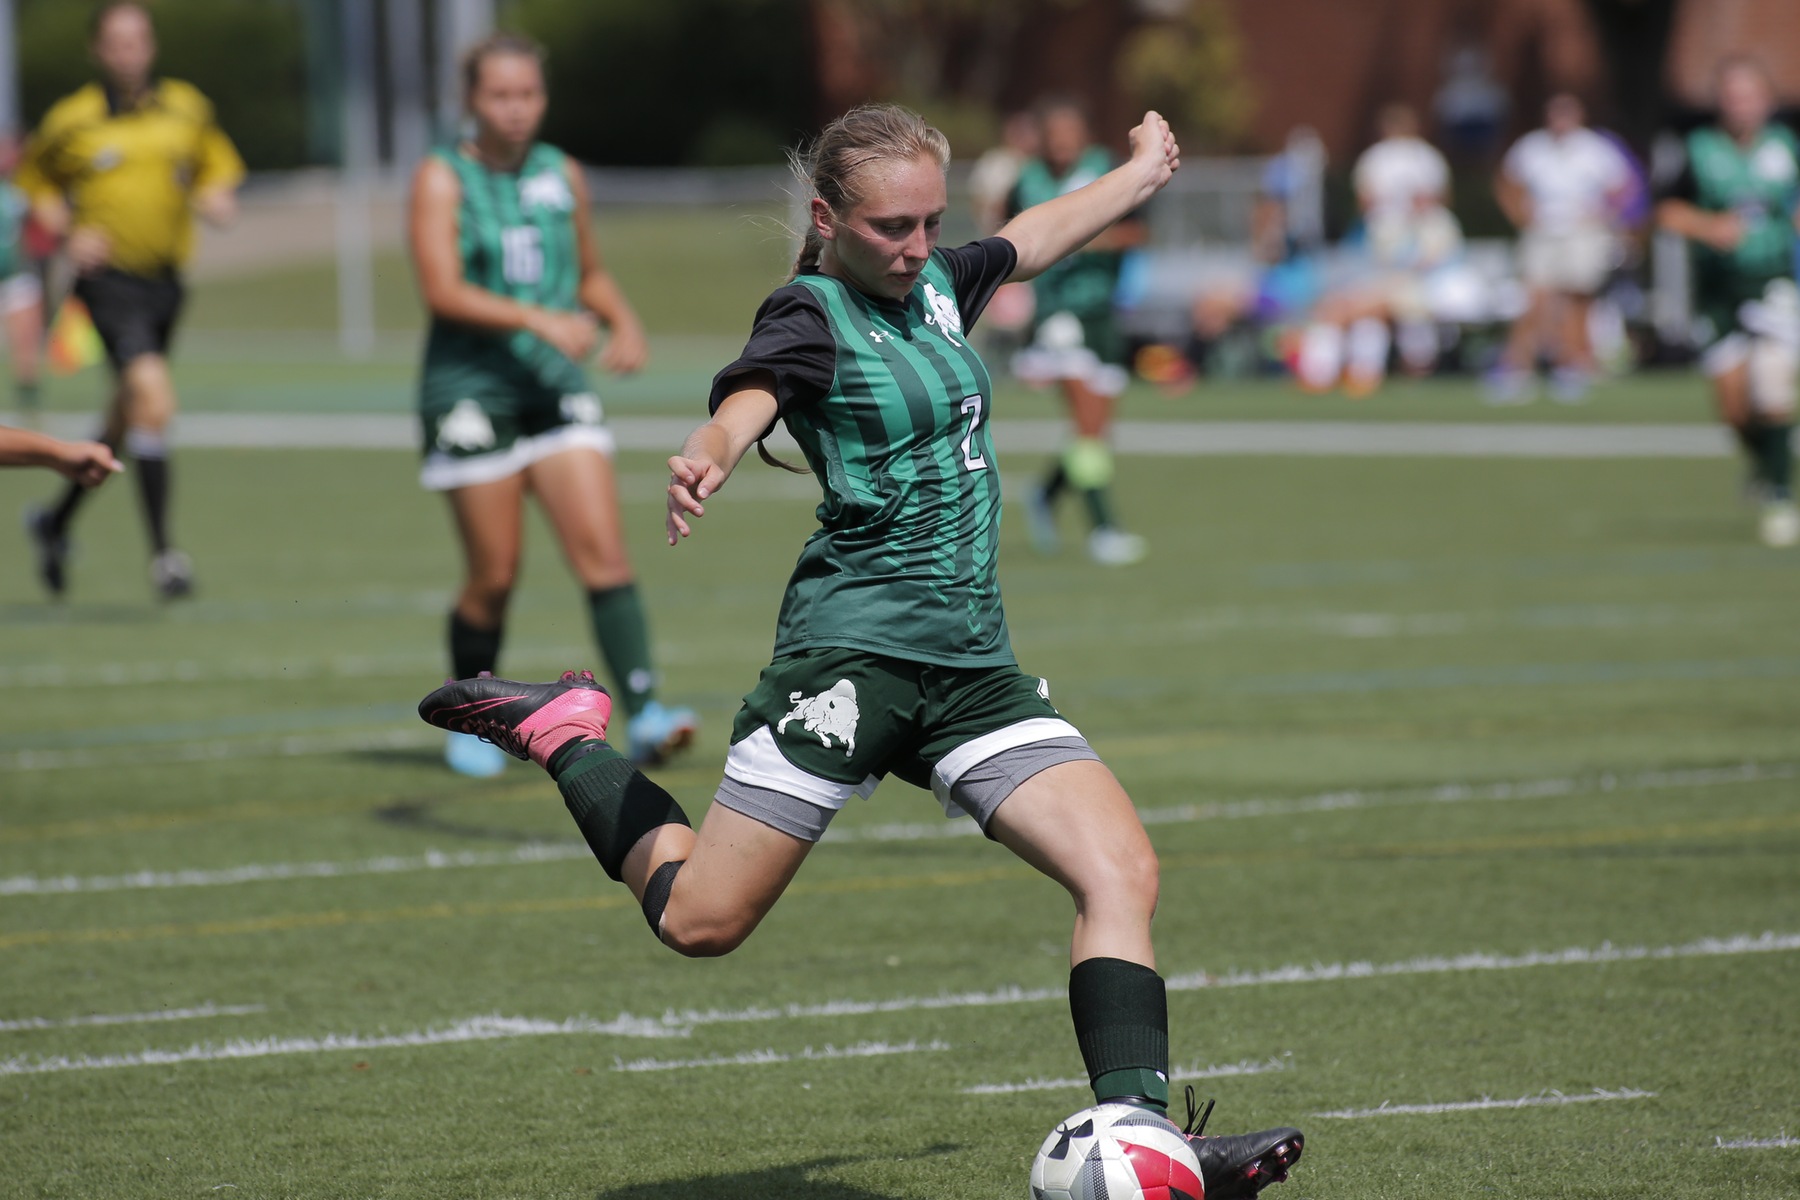 Bethany edged by Franciscan, 2-1